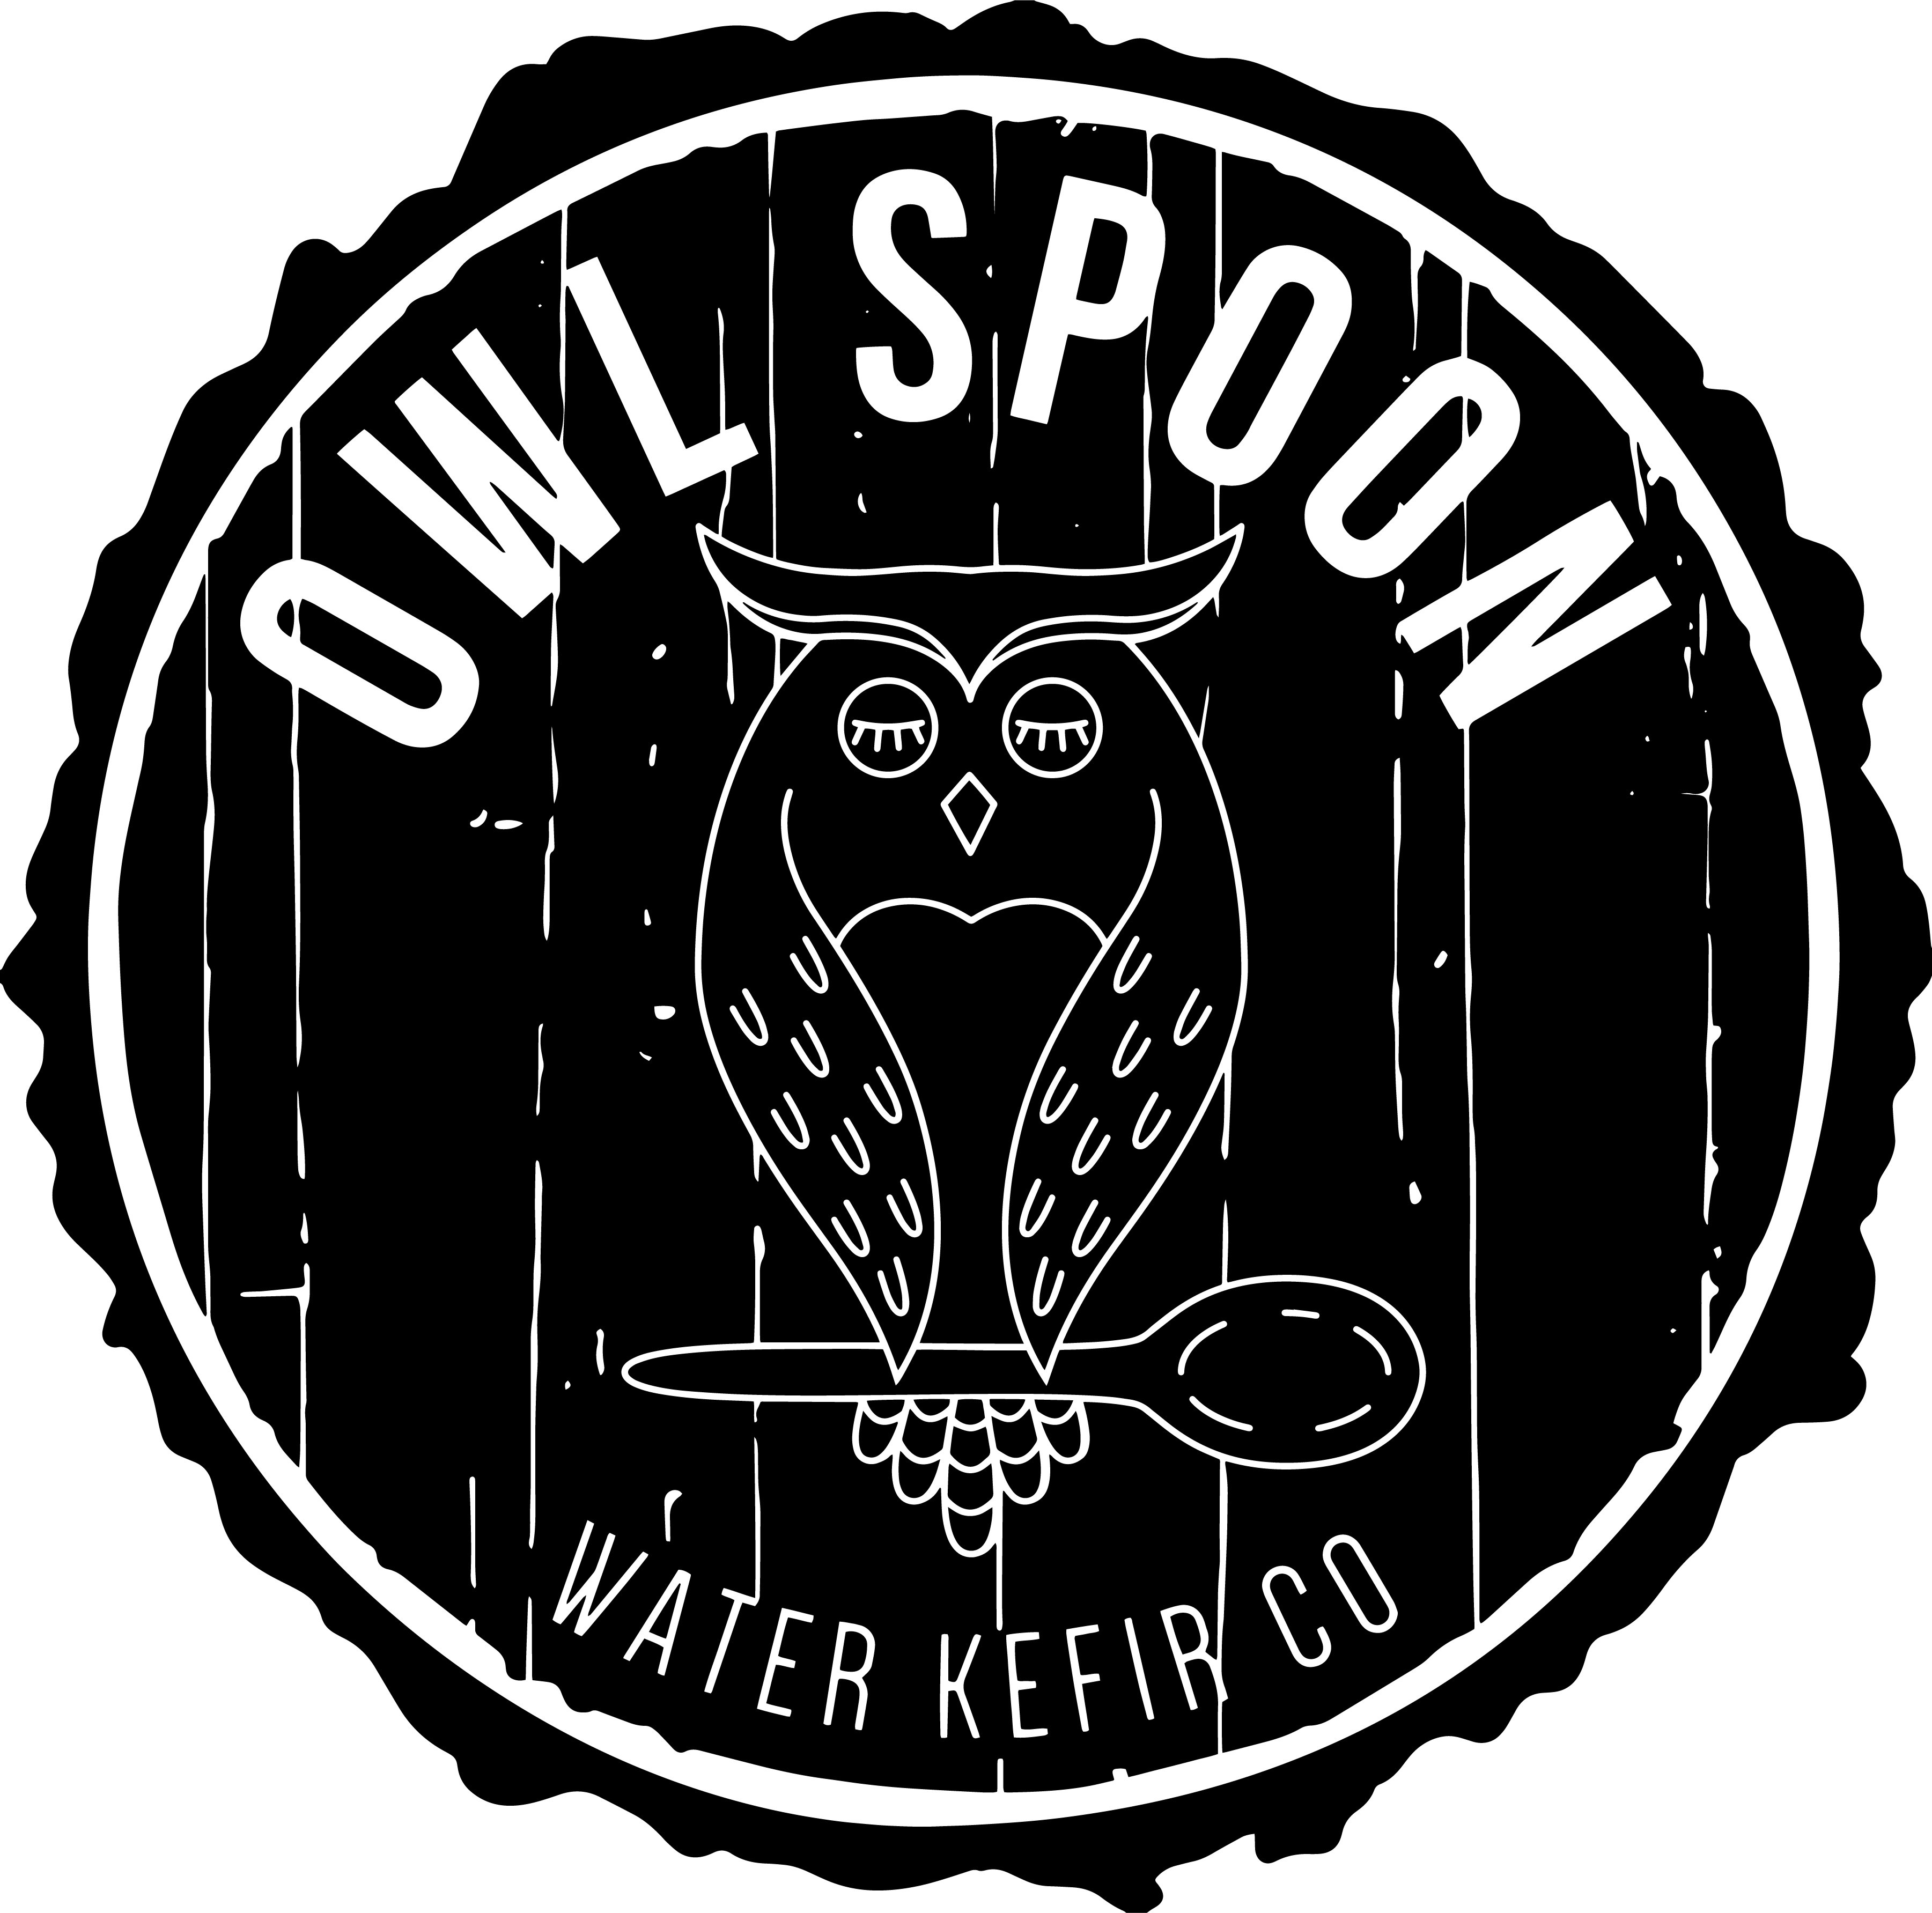 OwlSpoonKefir Profile Picture